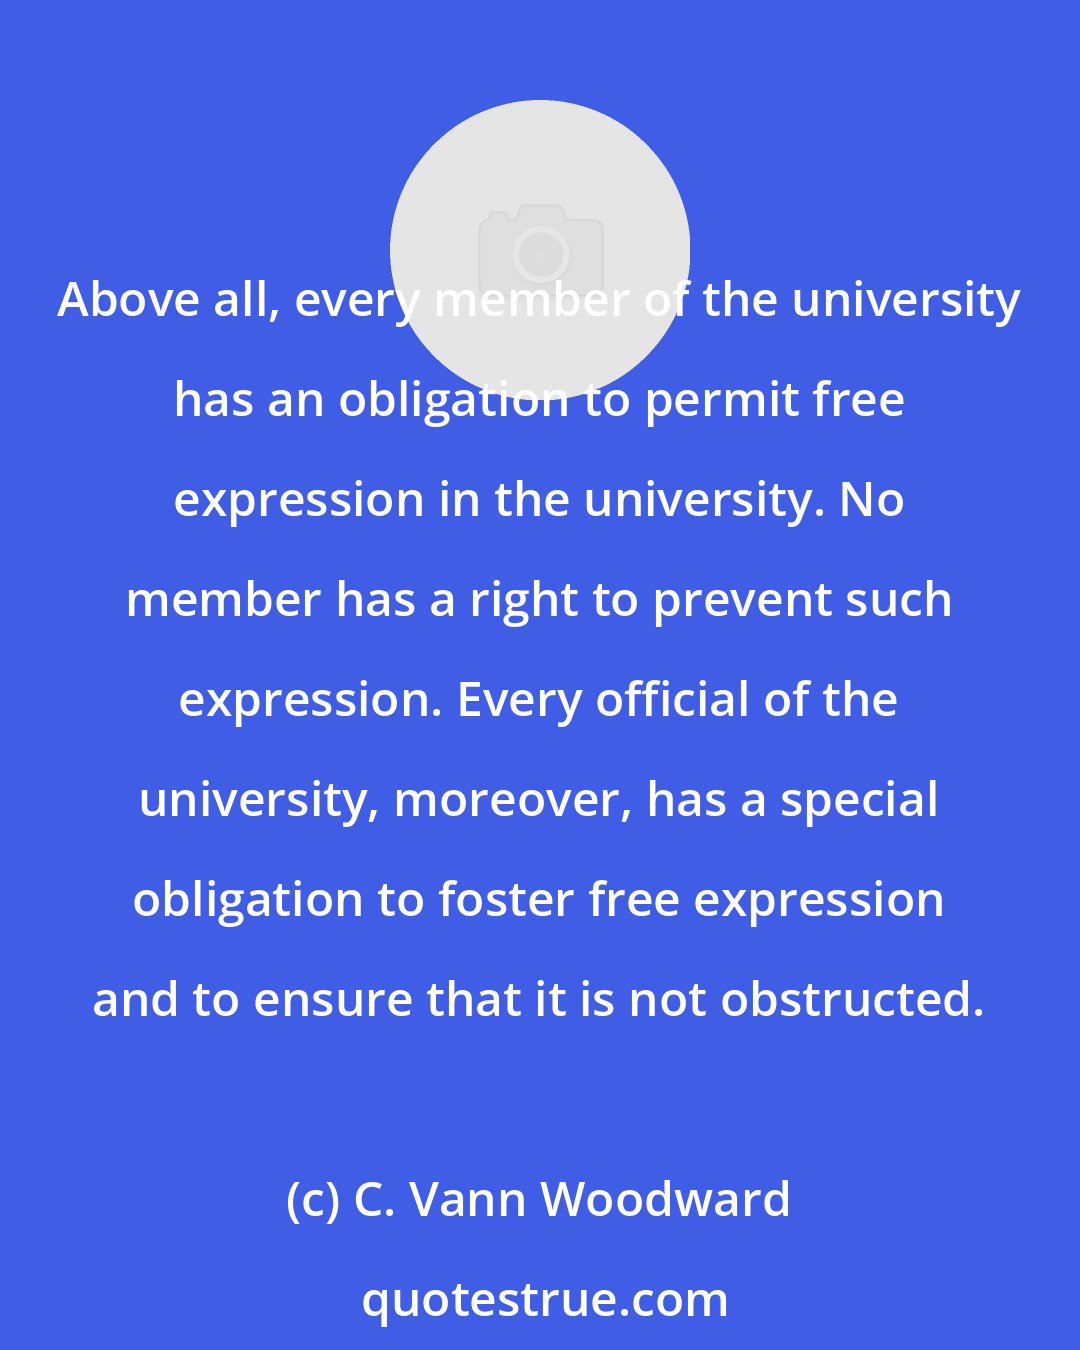 C. Vann Woodward: Above all, every member of the university has an obligation to permit free expression in the university. No member has a right to prevent such expression. Every official of the university, moreover, has a special obligation to foster free expression and to ensure that it is not obstructed.